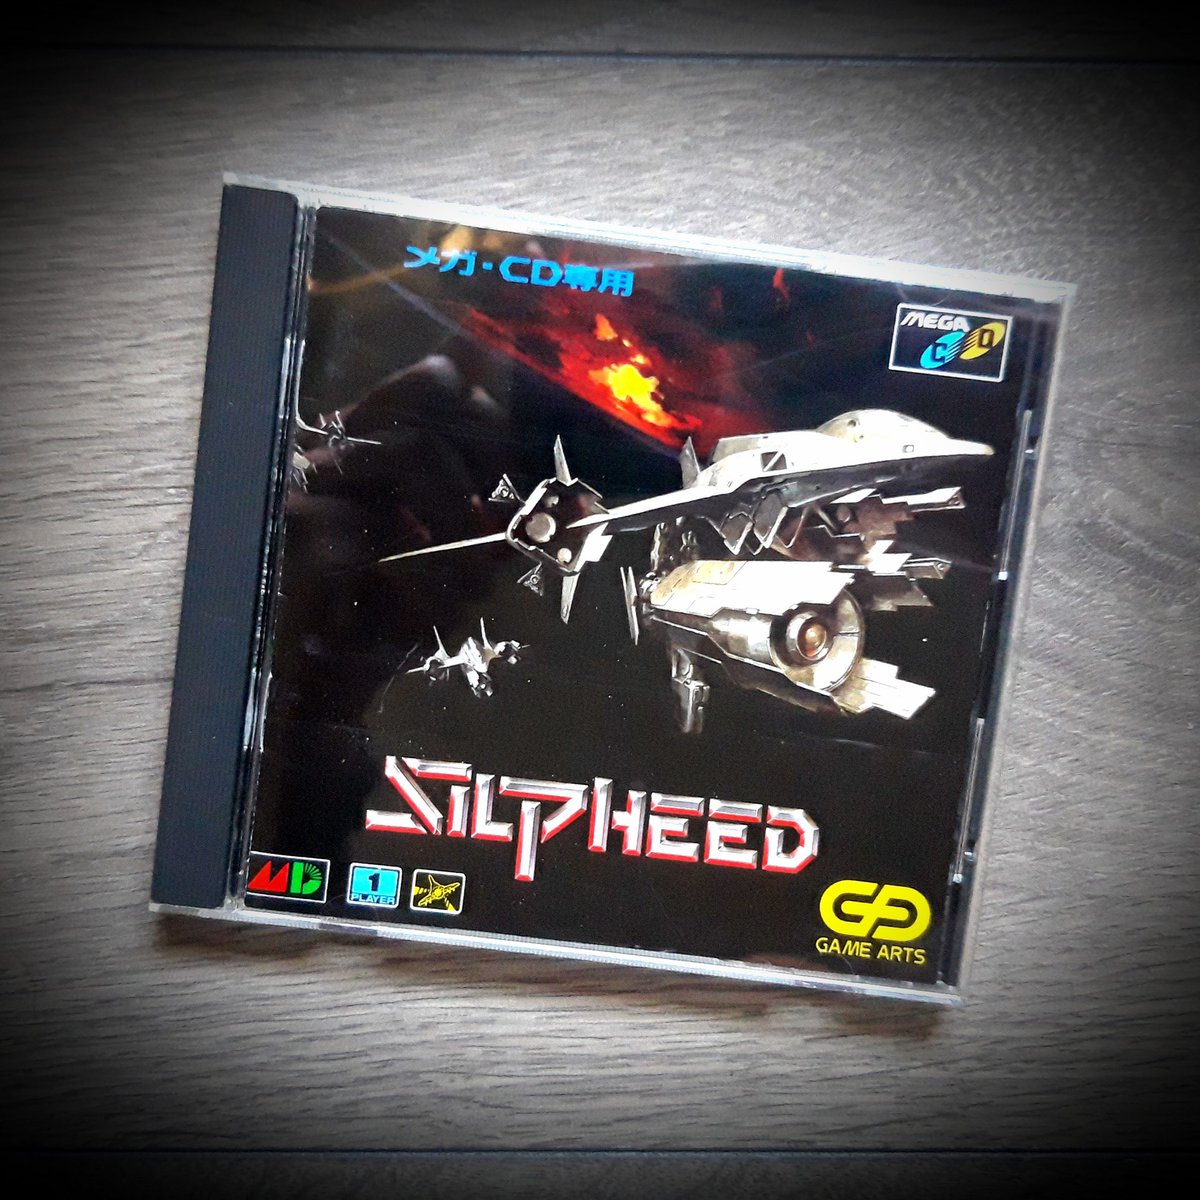 #Launching into #Space this #MegaCdMonday. A graphically impressive rail shooter for its day and a must have for the system. 

Who agrees? 🚀 🌌

#GamersUnite #RETROGAMING #retrogames #retrogamer #SEGA #Retro